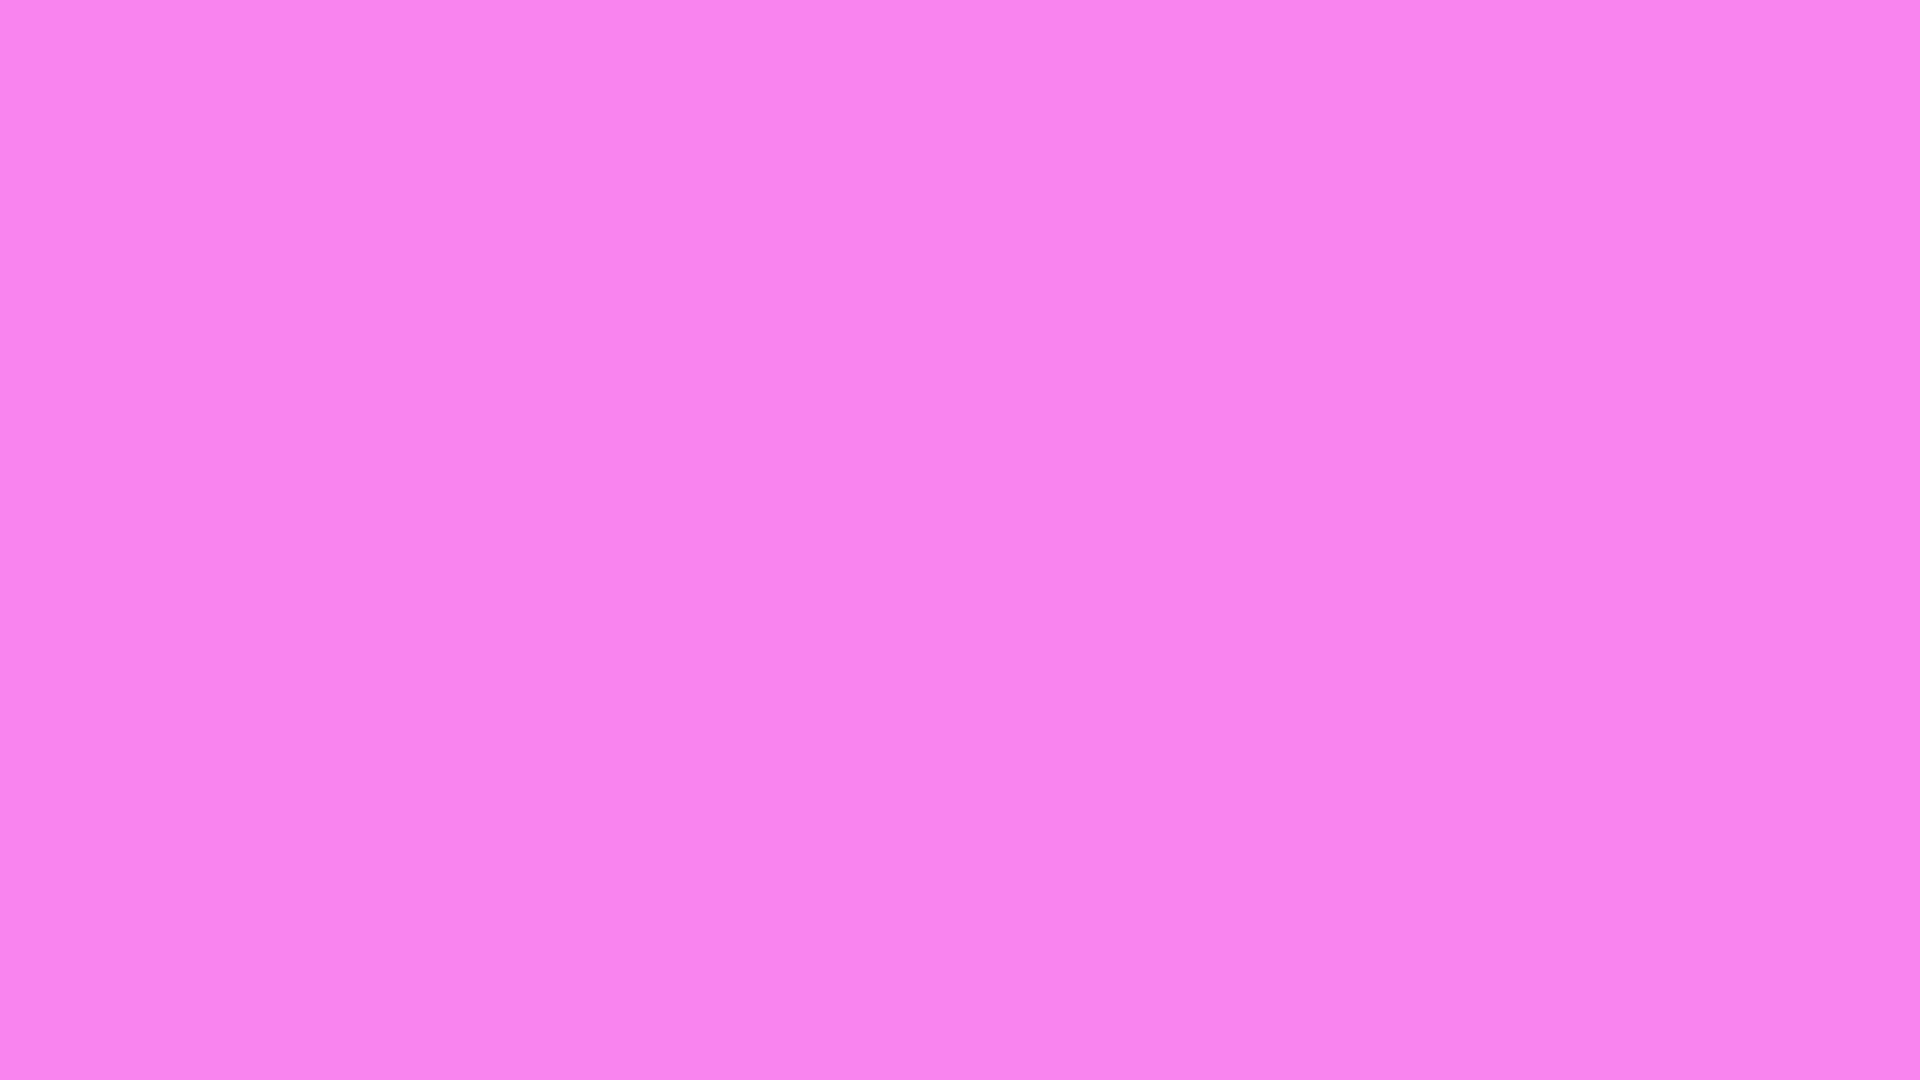 1920x1080 Light Fuchsia Pink Solid Color Background